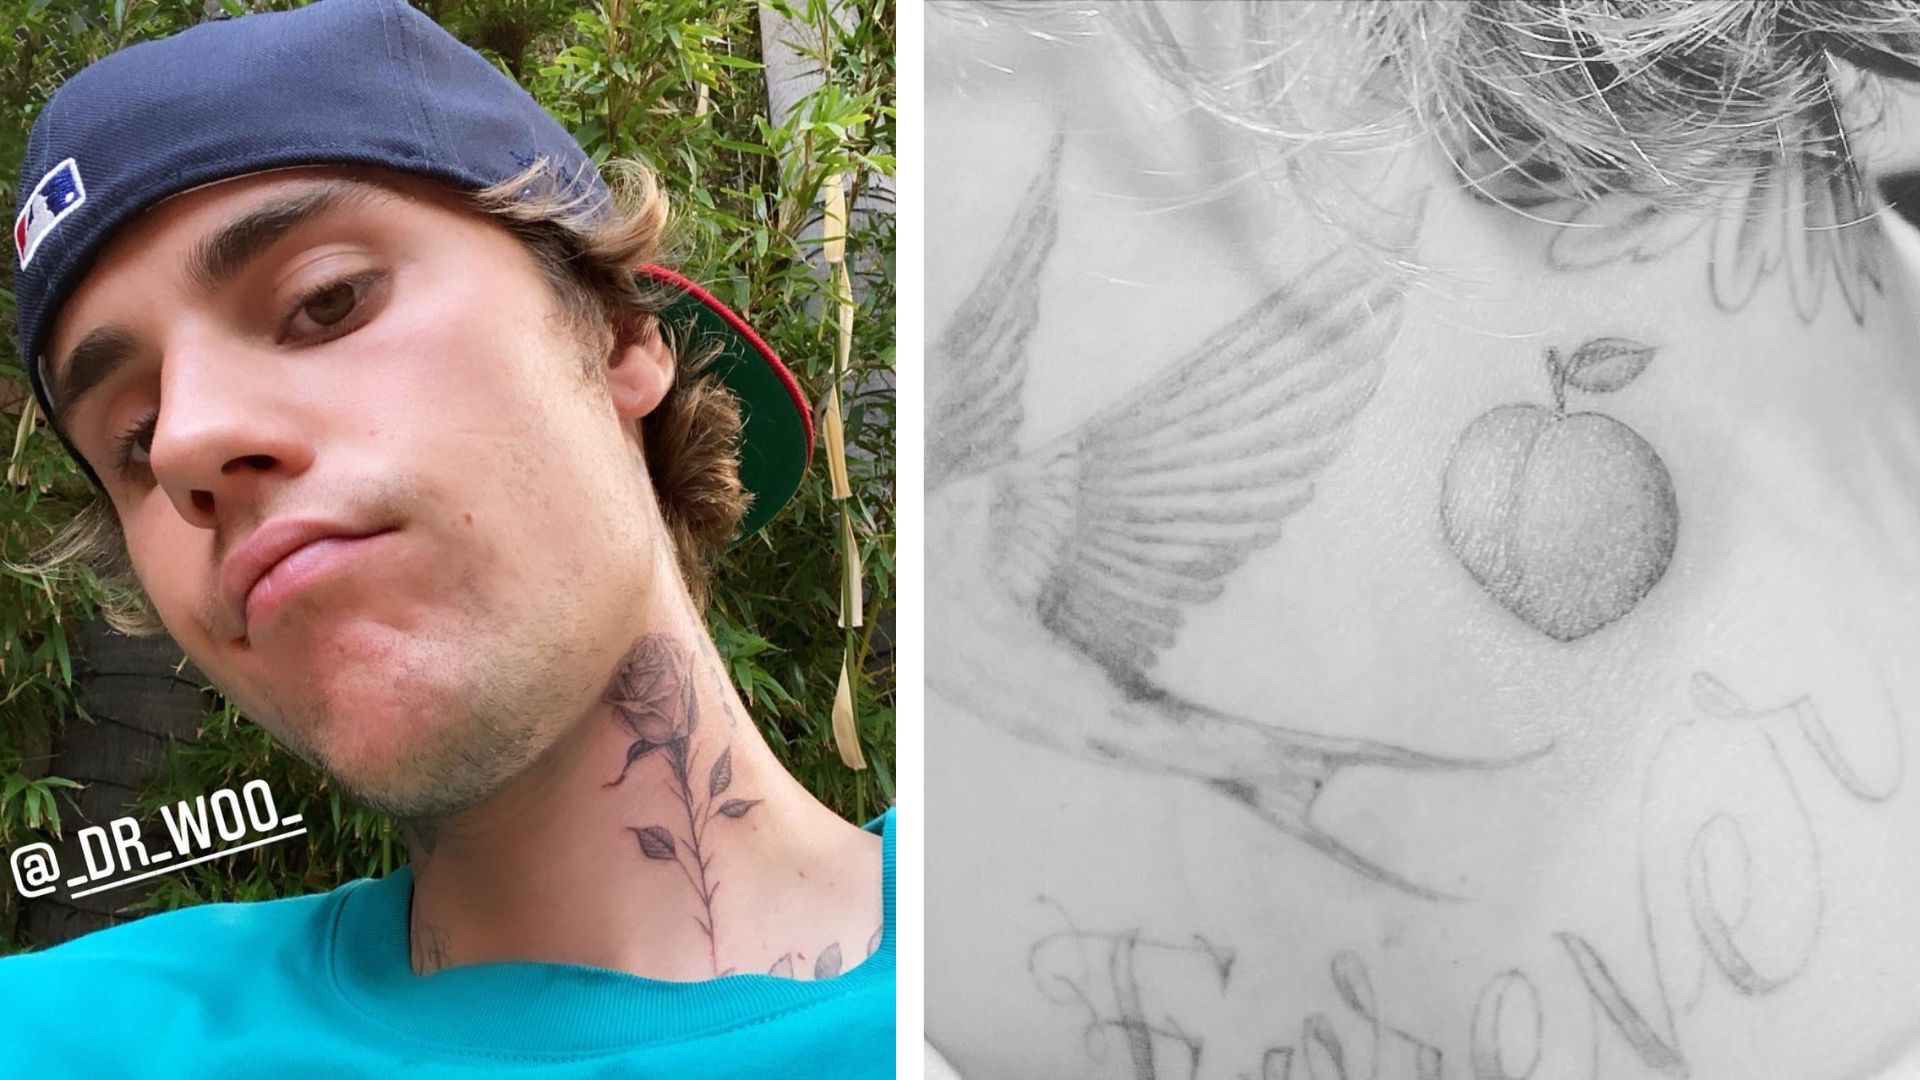 Take a peek at these stunning celebrity tattoos and their meanings